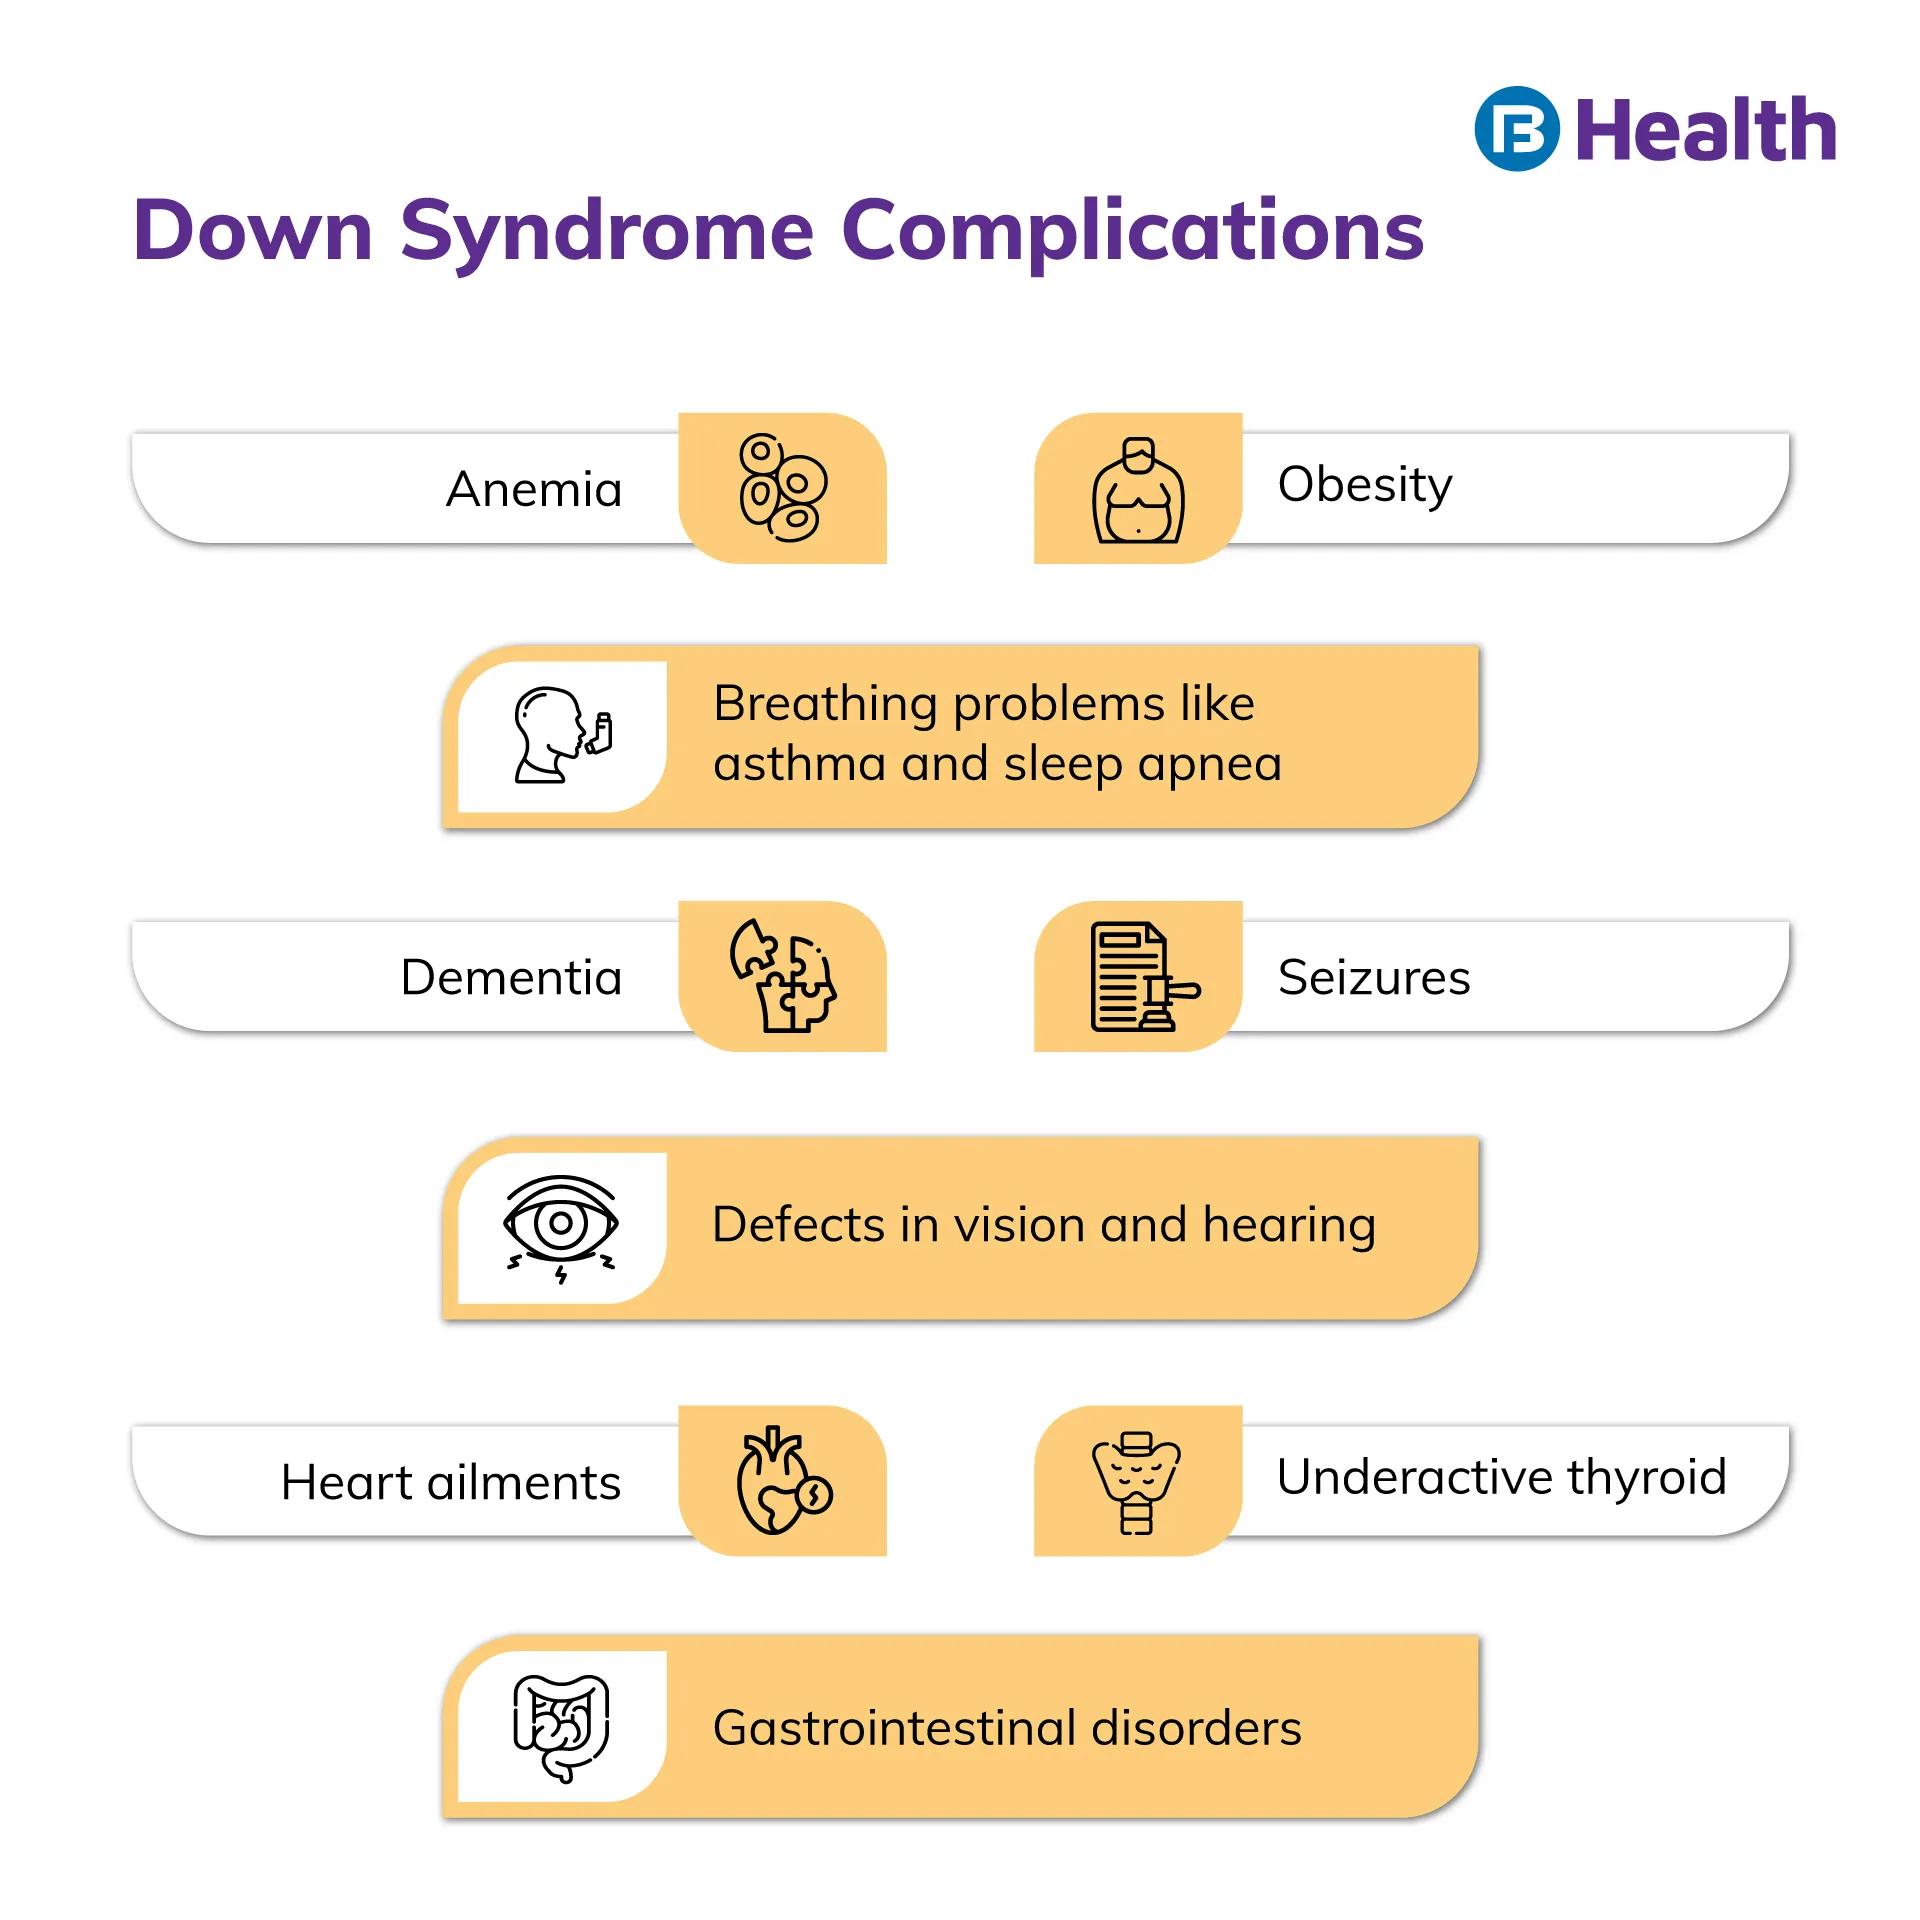 Down Syndrome Complications